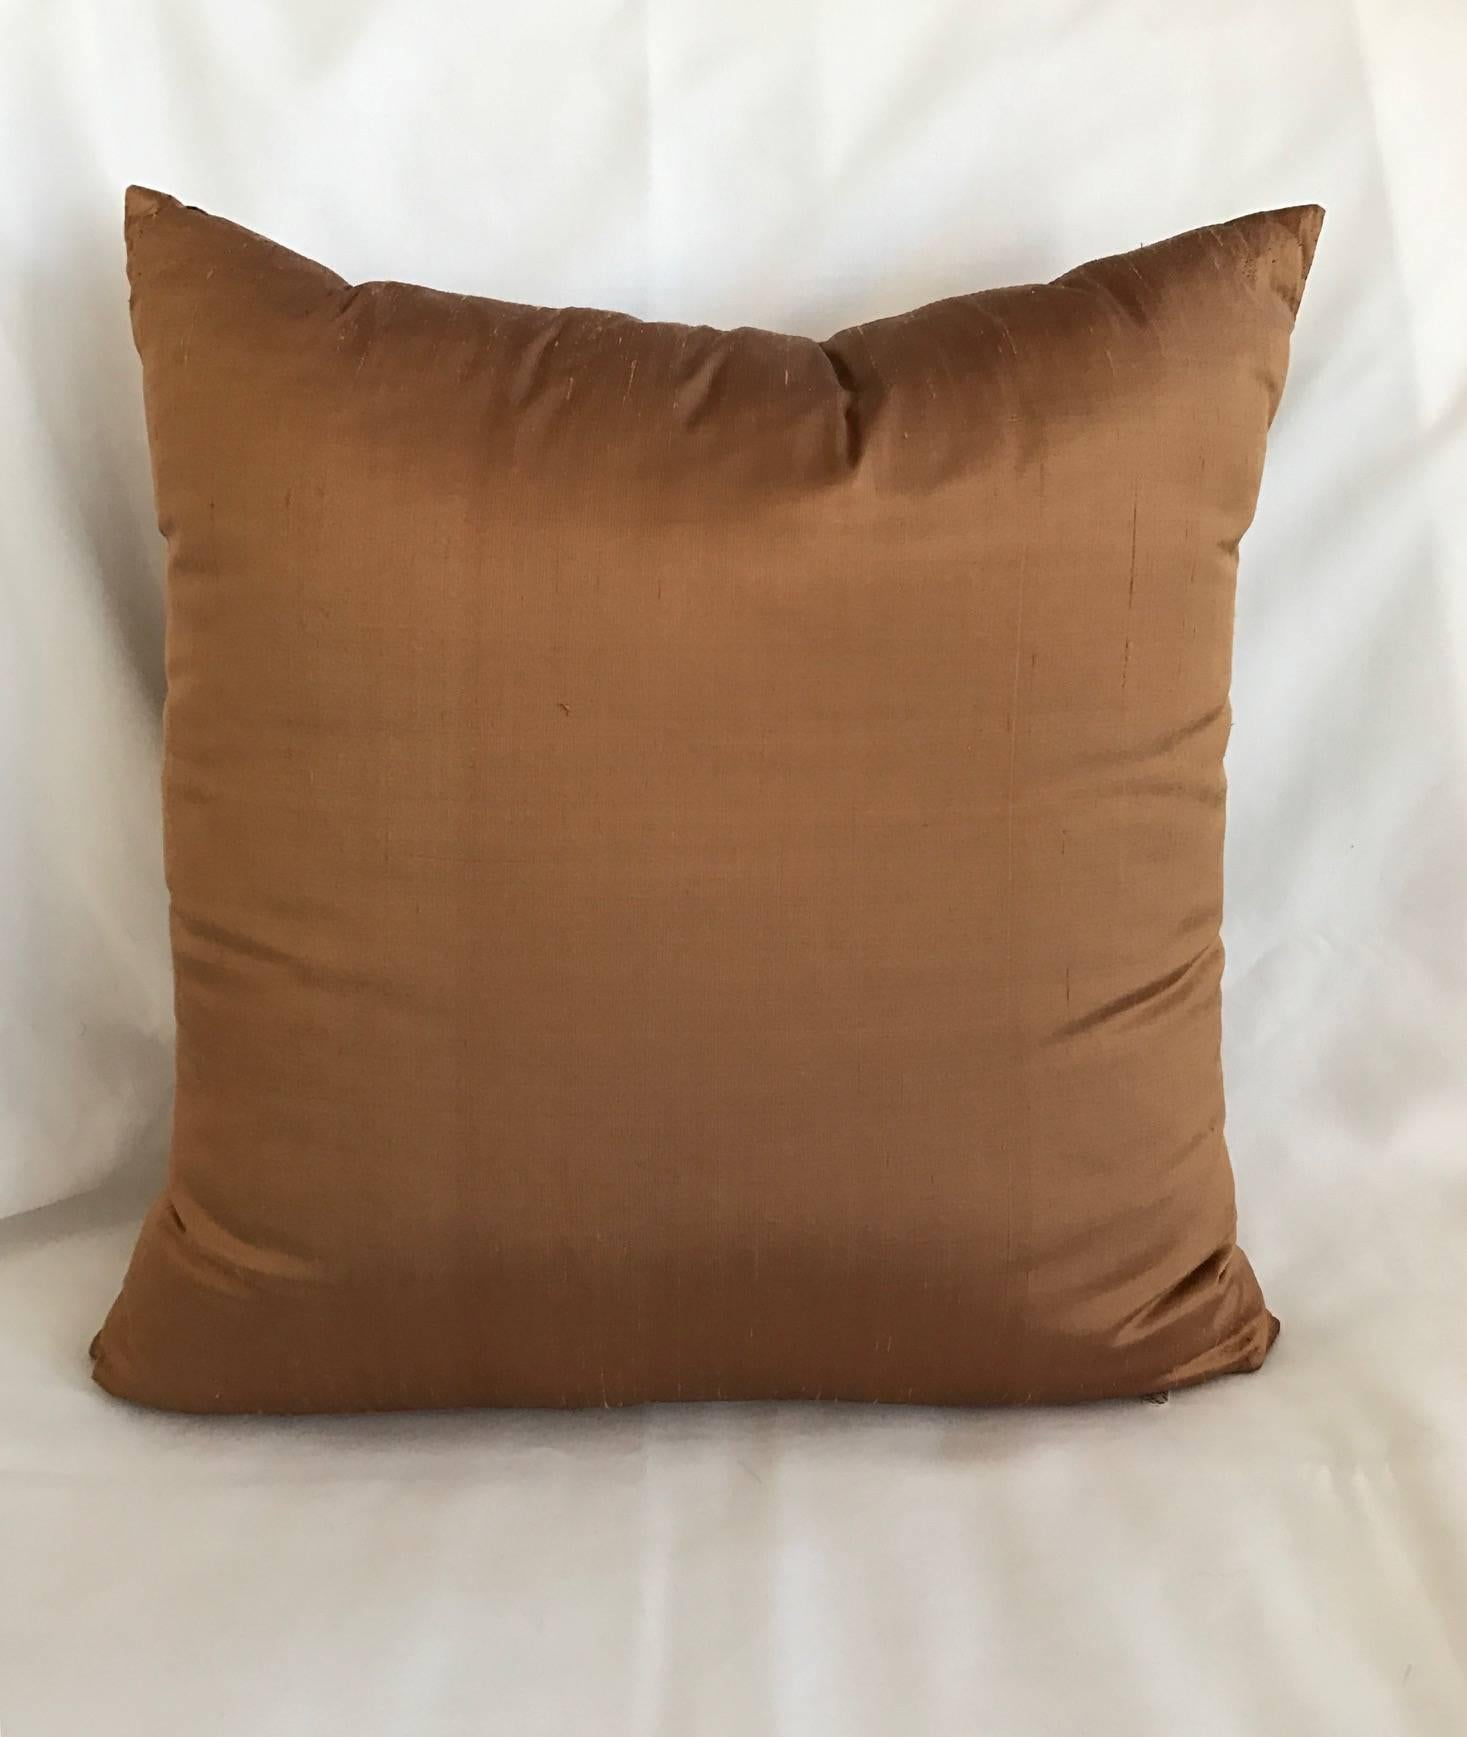 SALE Three Lee Jofa Silk Pillows Sandstone Brown, Graphite and Indian River Taup For Sale 1